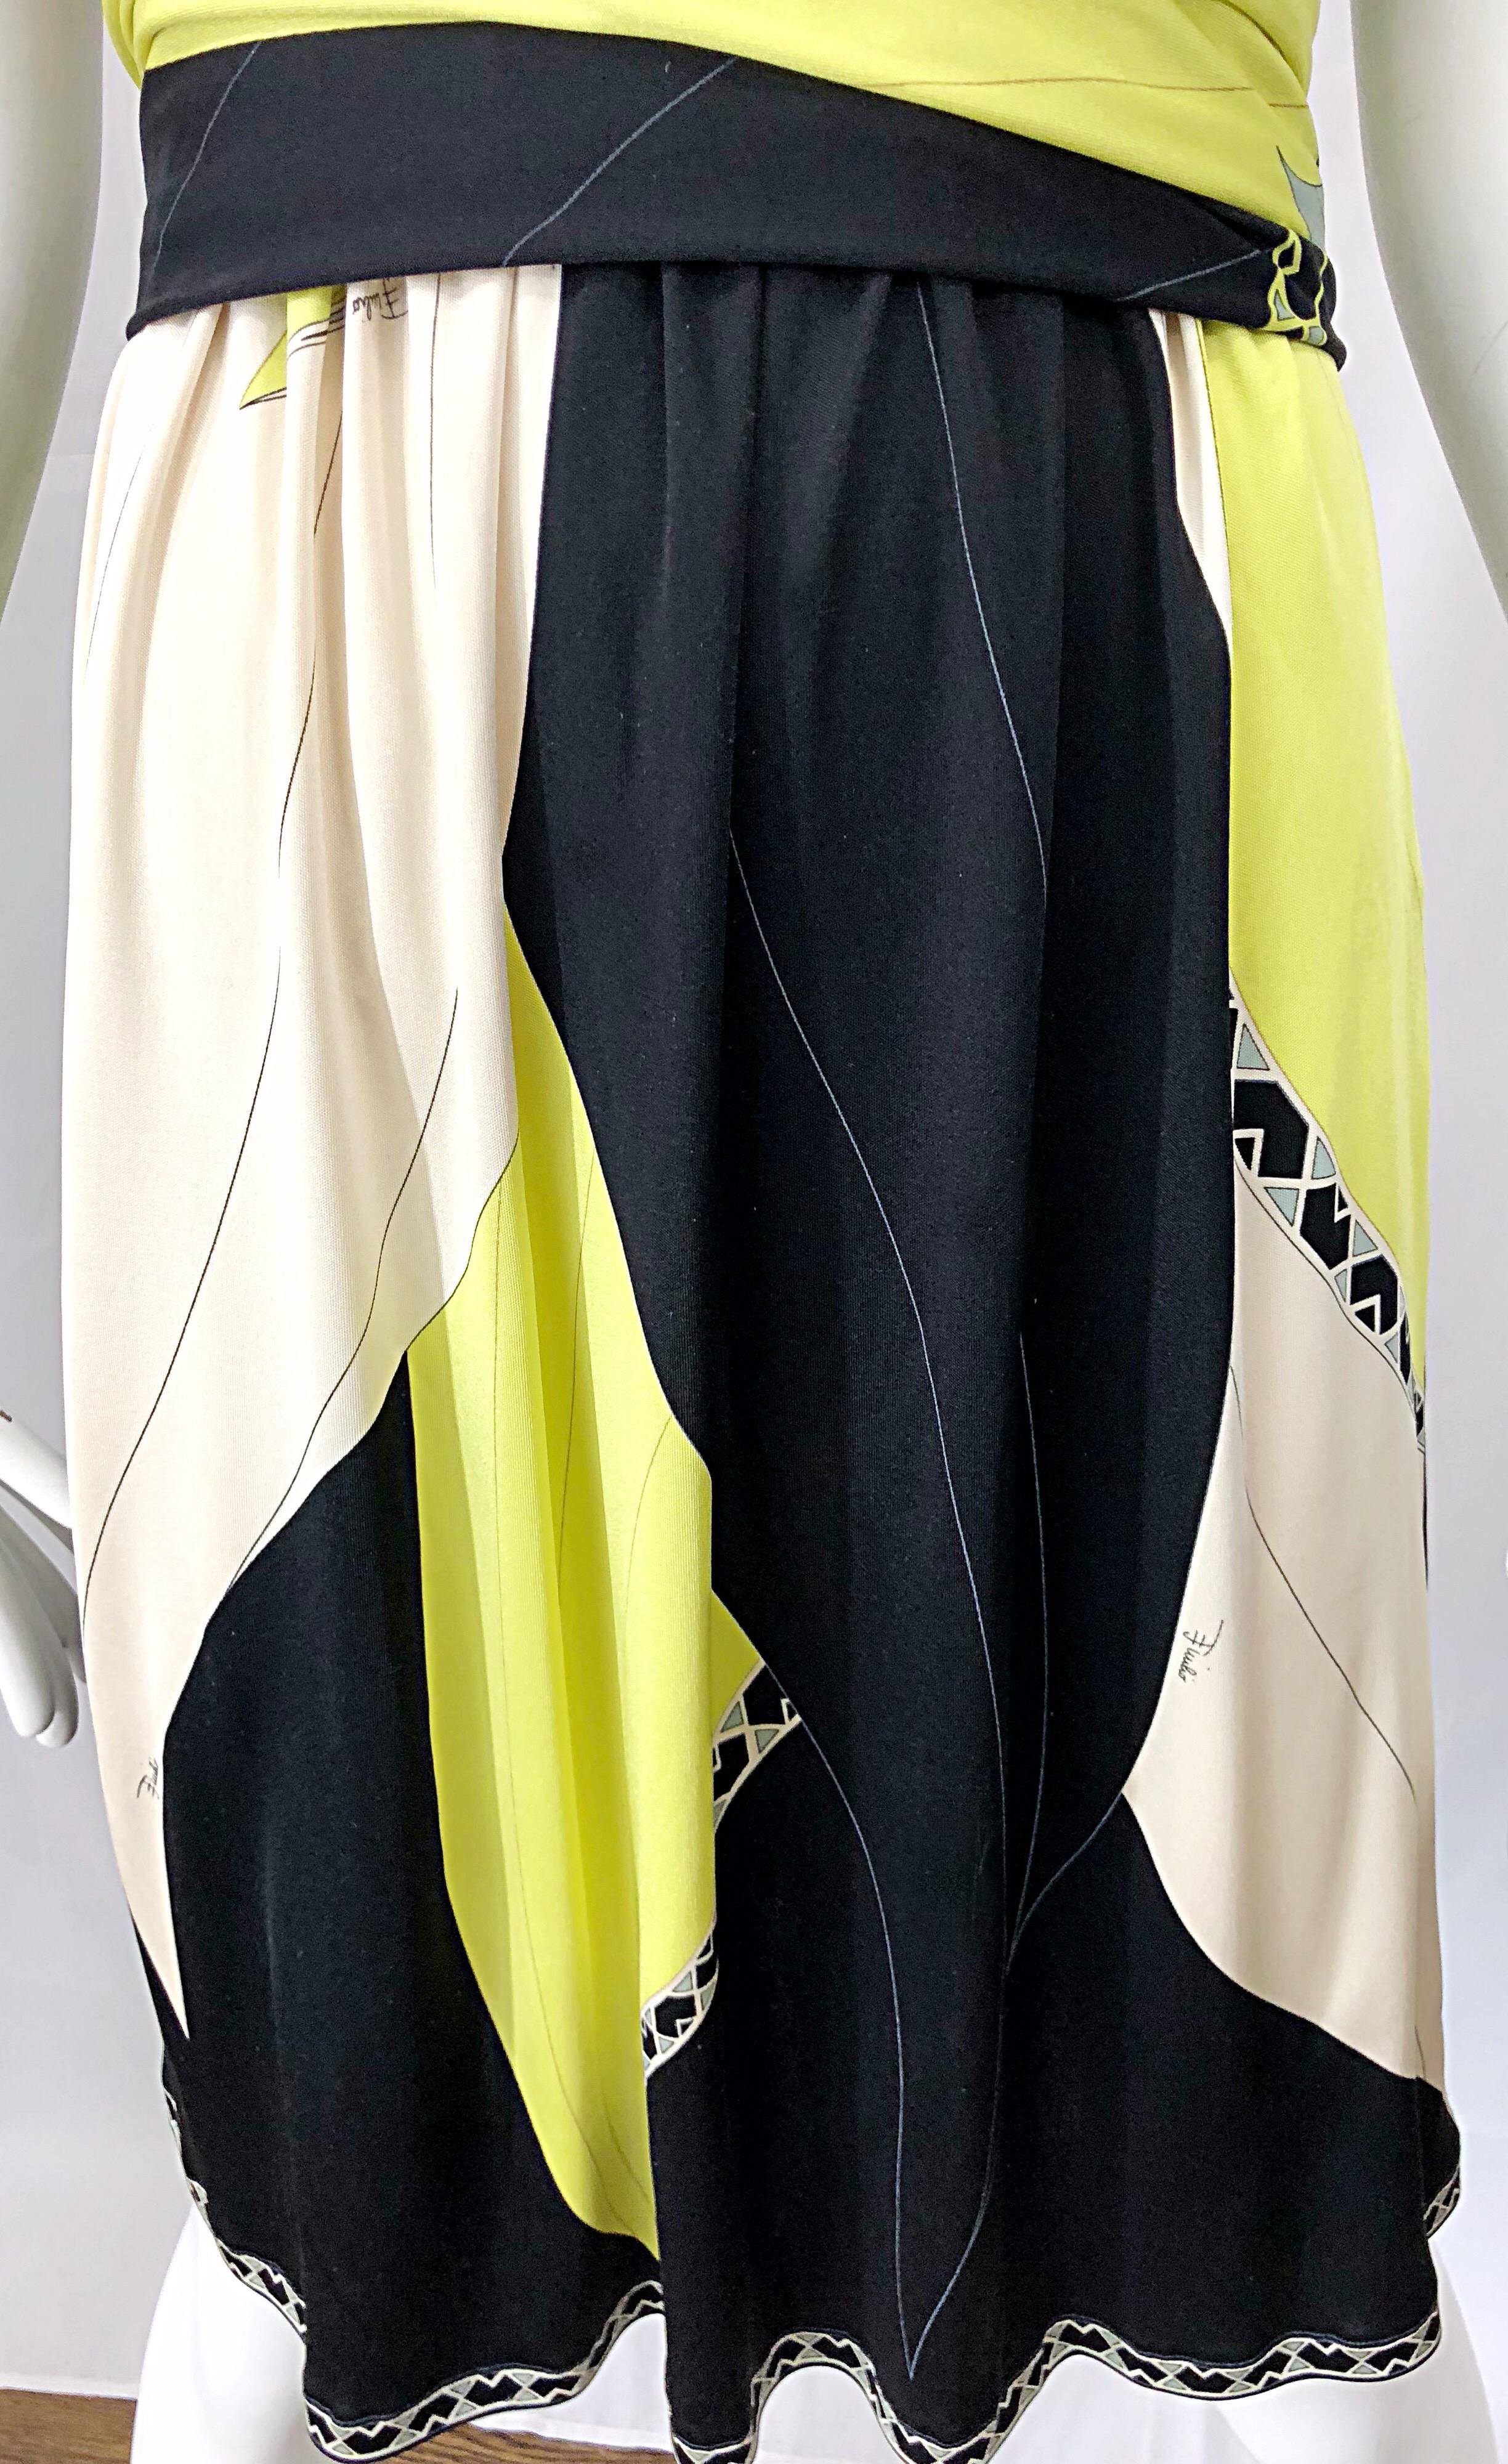 Emilio Pucci 1990s Size 6 Chartreuse Black Ivory Kaleidoscope Silk Jersey Dress In Excellent Condition For Sale In San Diego, CA